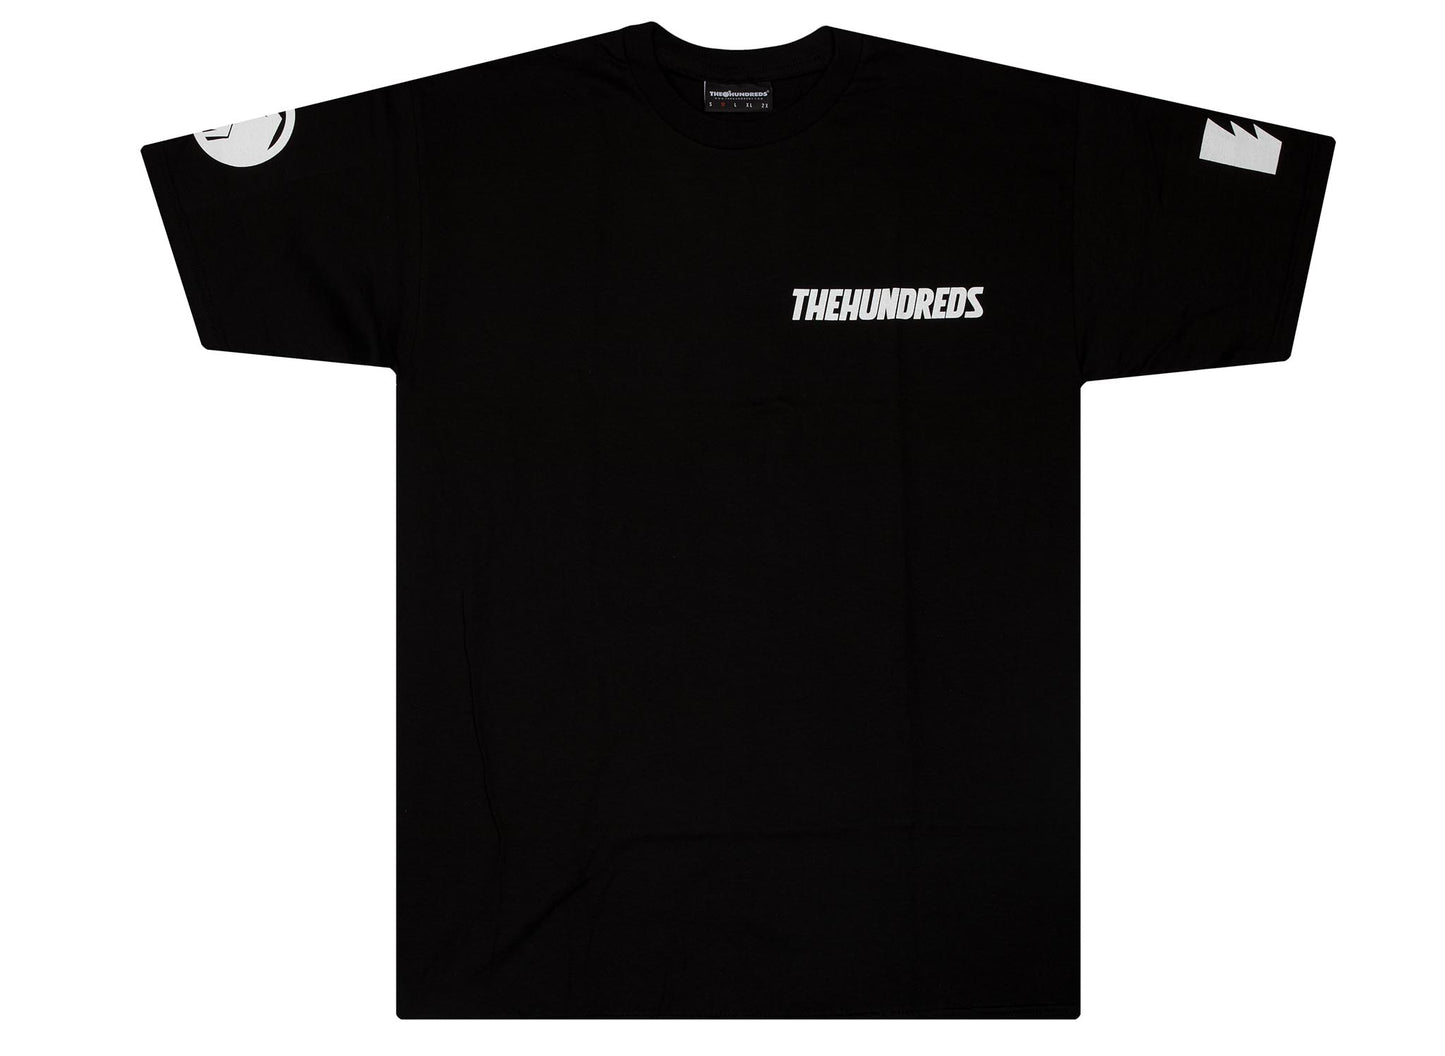 The Hundreds X The Shadow T-Shirt